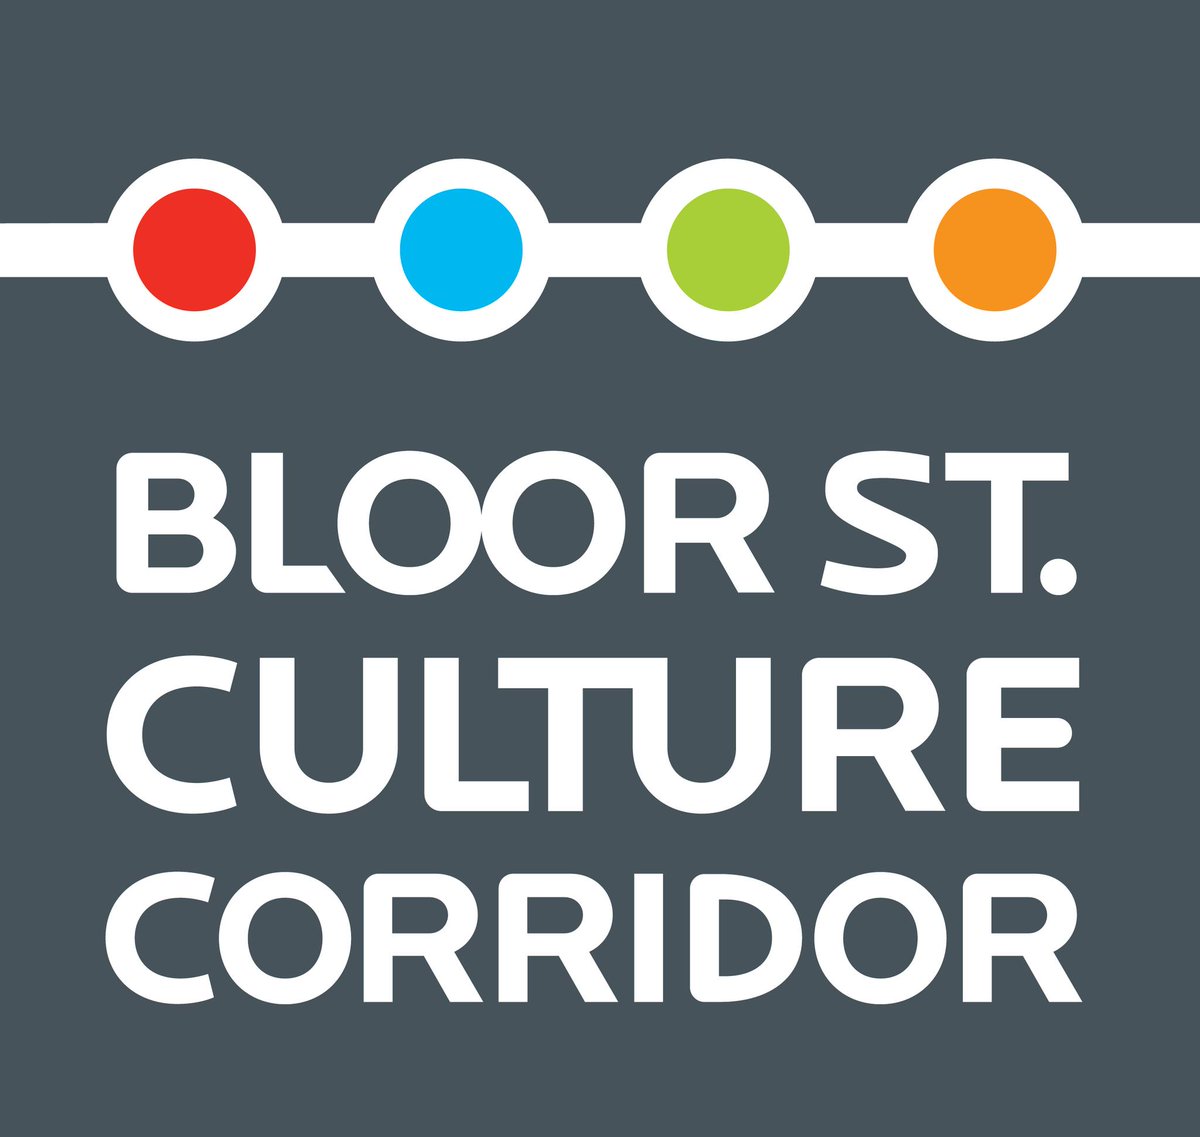 We are proud to be a part of Toronto's most diverse arts and culture district - the @BloorStCulture Corridor! Check out a range of exciting activities from our amazing partner organizations here: bloorstculturecorridor.com